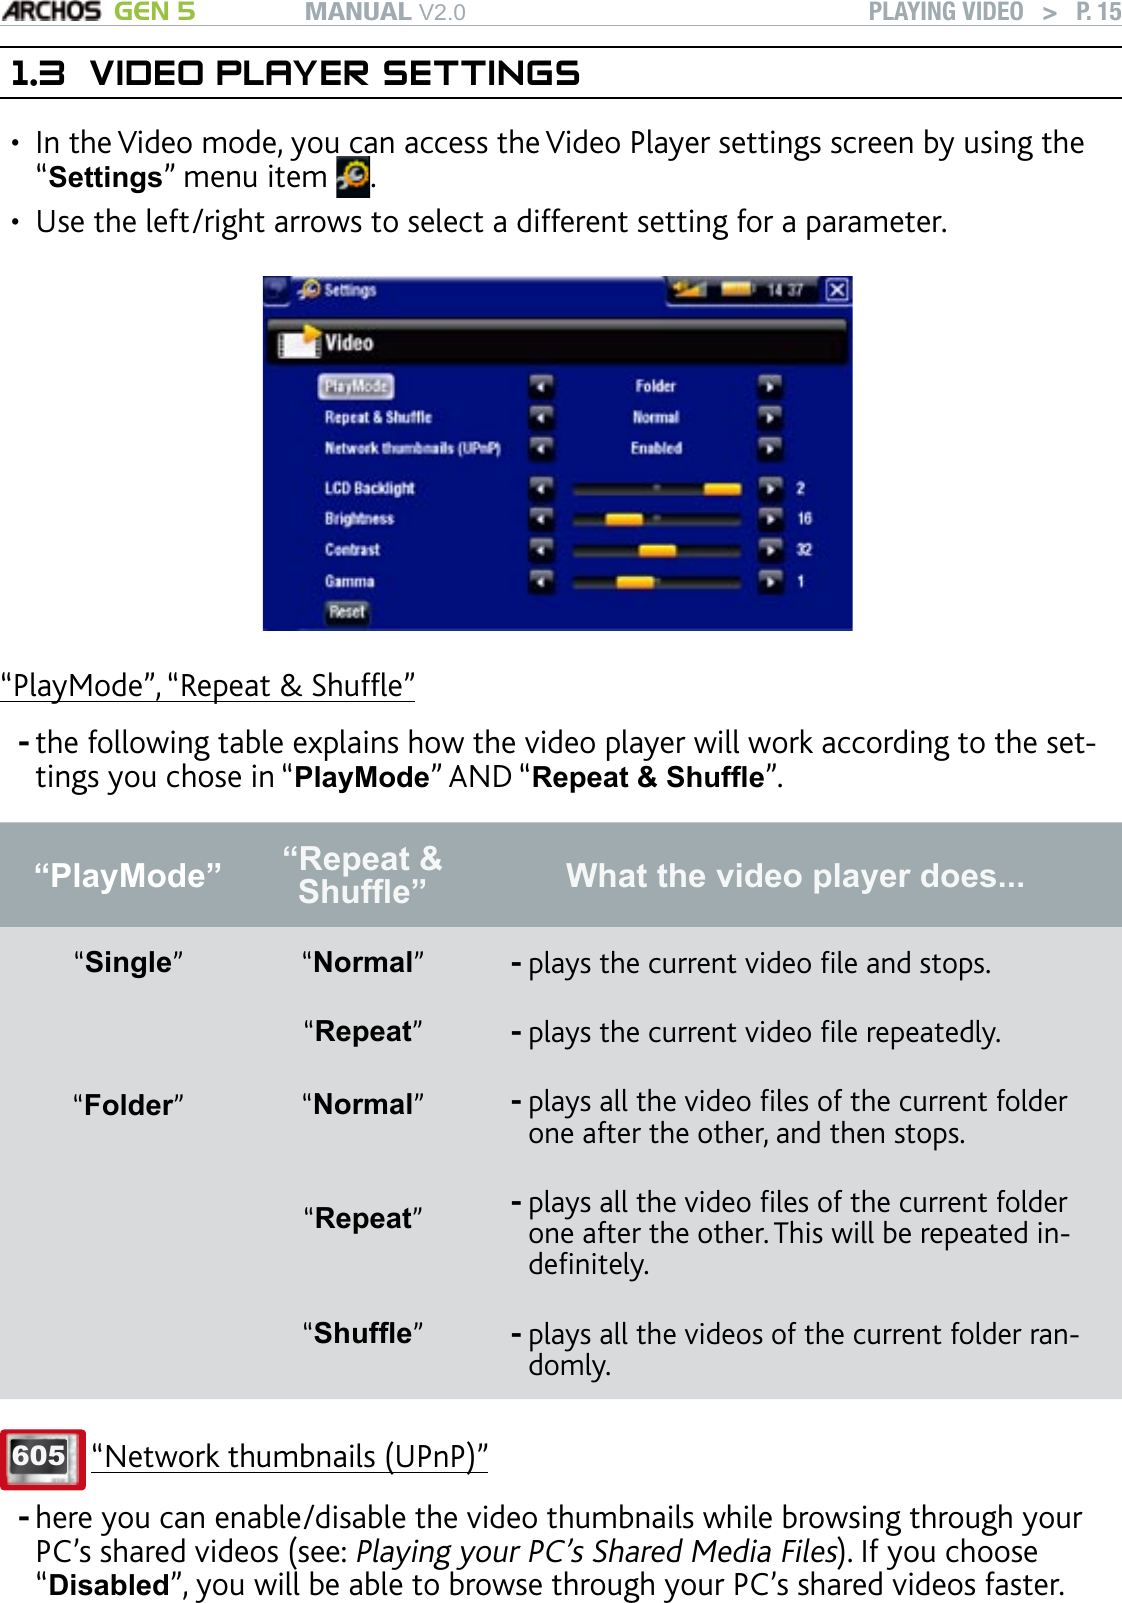 MANUAL V2.0 GEN 5 PLAYING VIDEO   &gt;   P. 151.3  VIDEO PLAYER SETTINGSIn the Video mode, you can access the Video Player settings screen by using the “Settings” menu item  . Use the left/right arrows to select a different setting for a parameter.“PlayMode”, “Repeat &amp; Shufe”the following table explains how the video player will work according to the set-tings you chose in “PlayMode” AND “Repeat &amp; Shufe”. “PlayMode”  “Repeat &amp; Shufe” What the video player does...“Single” “Normal”plays the current video le and stops.-“Repeat”plays the current video le repeatedly.-“Folder”“Normal”plays all the video les of the current folder one after the other, and then stops.-“Repeat”plays all the video les of the current folder one after the other. This will be repeated in-denitely.-“Shufe”  plays all the videos of the current folder ran-domly.-605 “Network thumbnails (UPnP)”here you can enable/disable the video thumbnails while browsing through your PC’s shared videos (see: Playing your PC’s Shared Media Files). If you choose “Disabled”, you will be able to browse through your PC’s shared videos faster. ••--